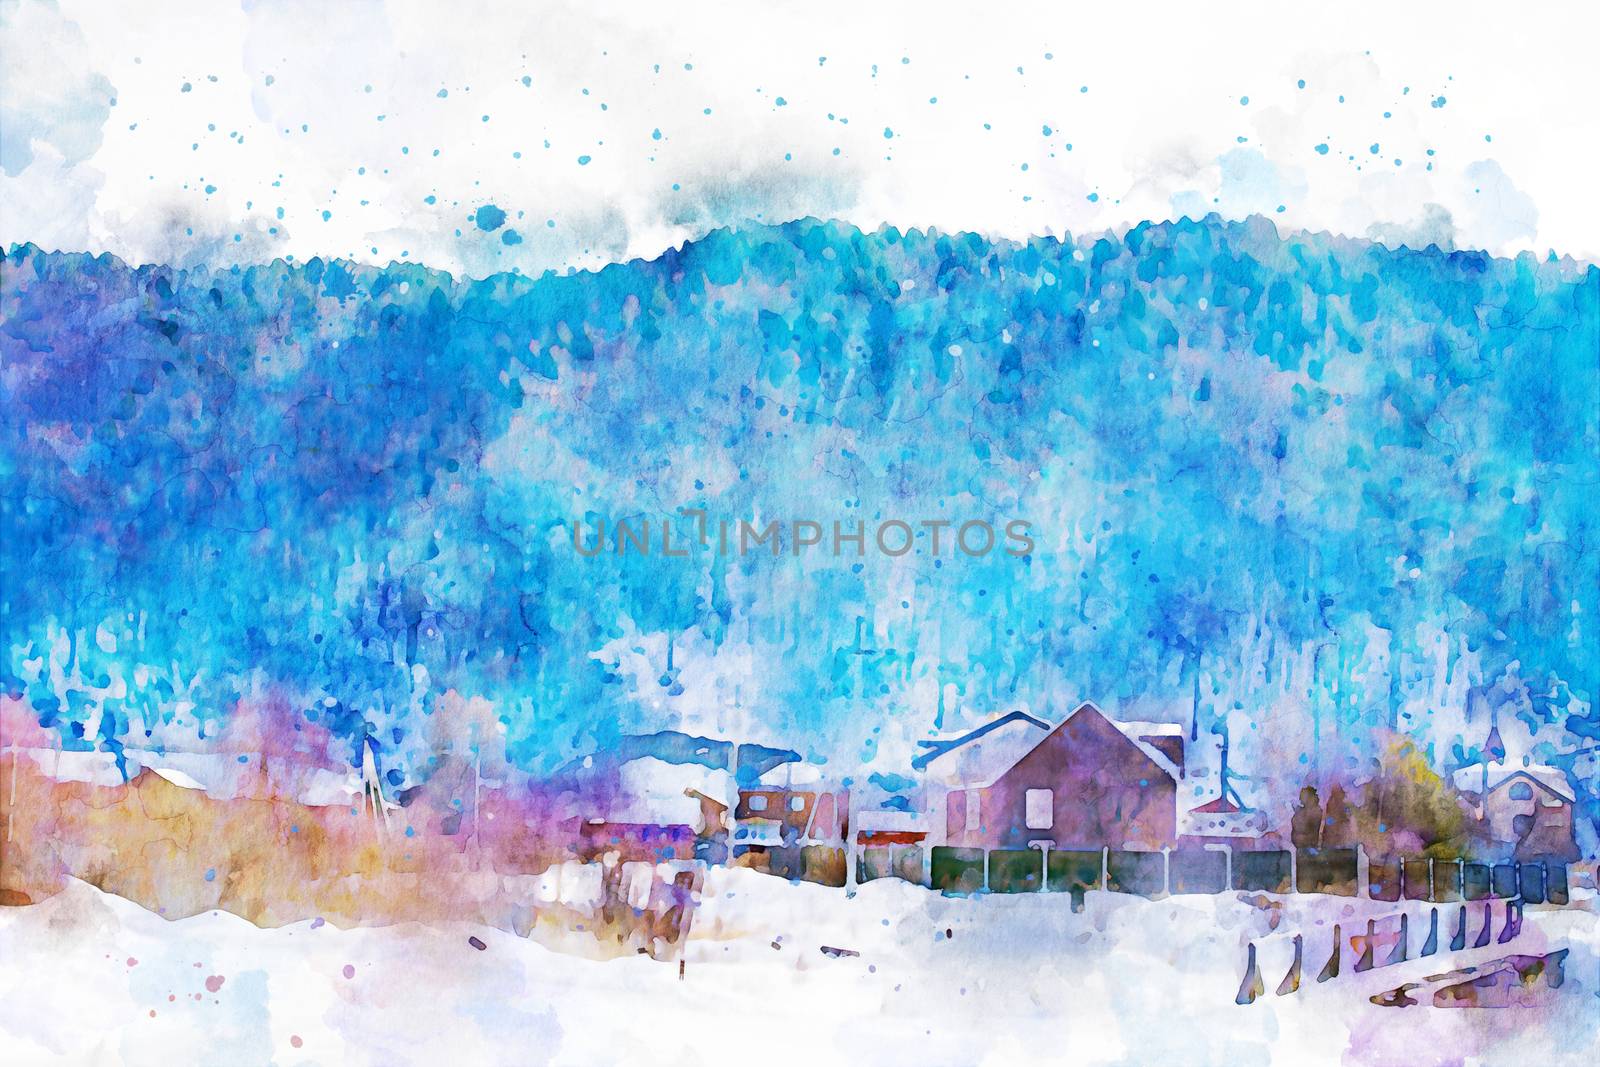 Village in rural area with snow on ground and mountain background, winter season illustration, digital watercolor painting